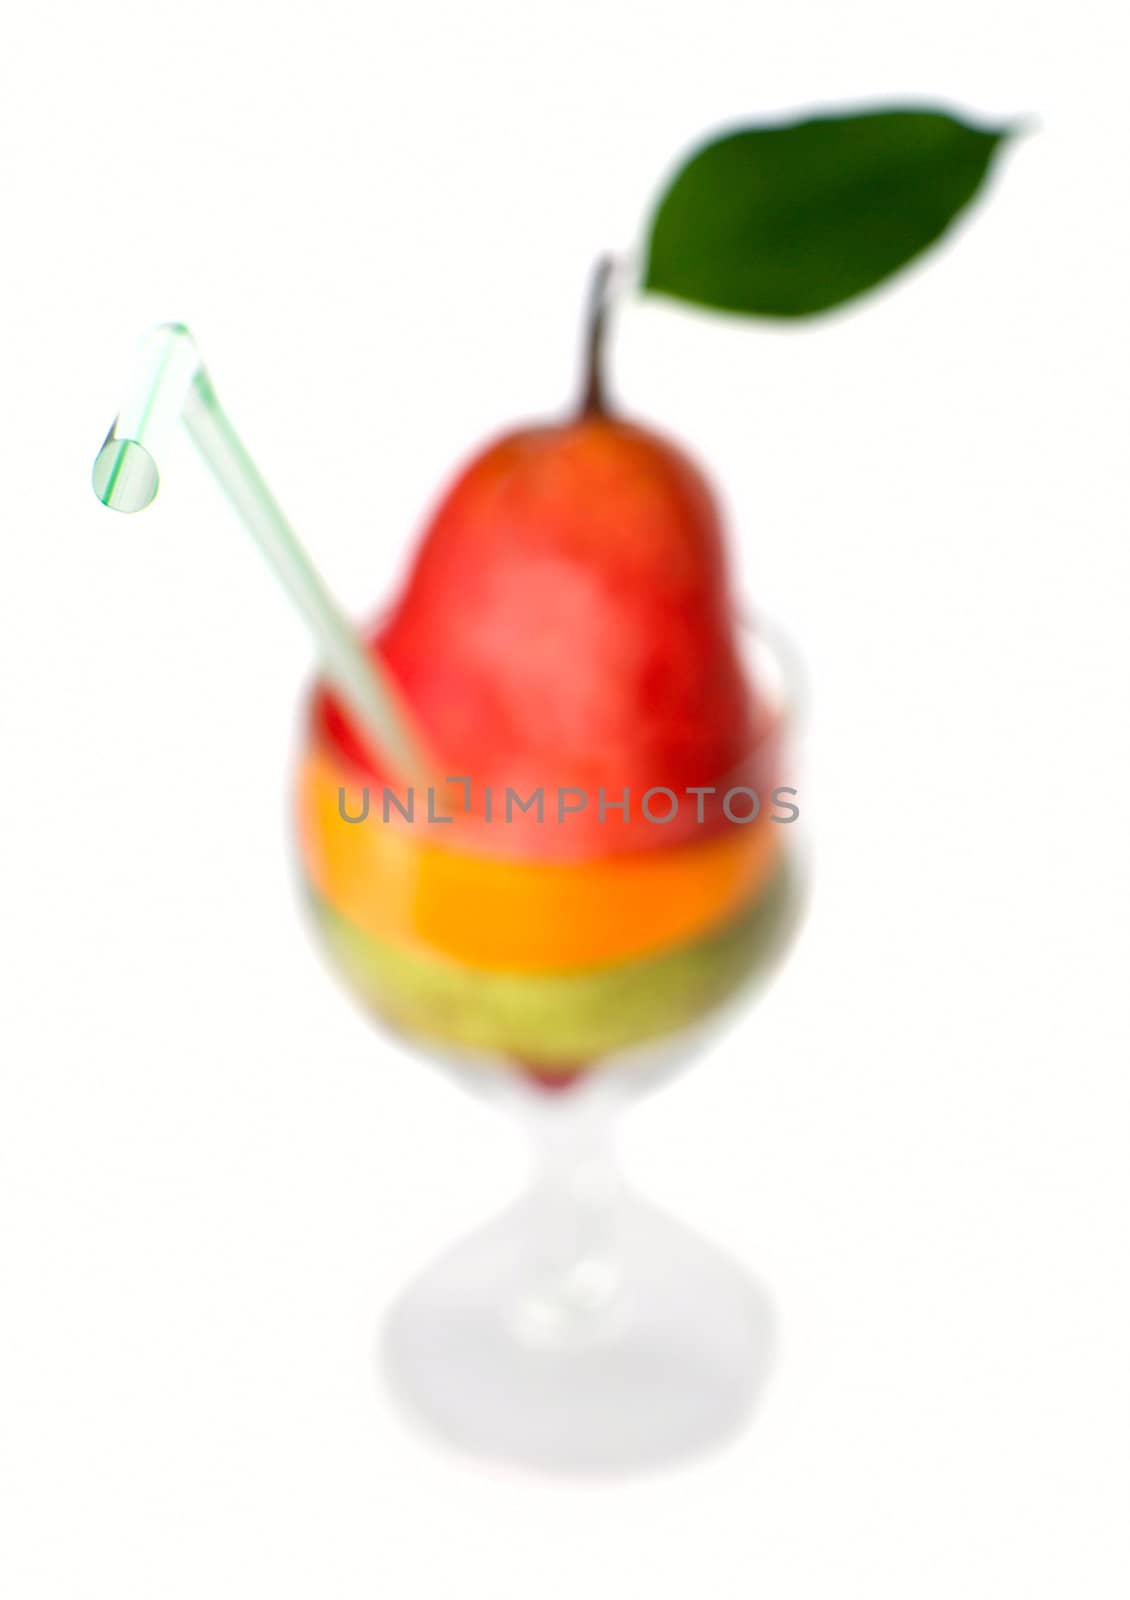 Fruit cocktail with tube, focus on the end of the tube